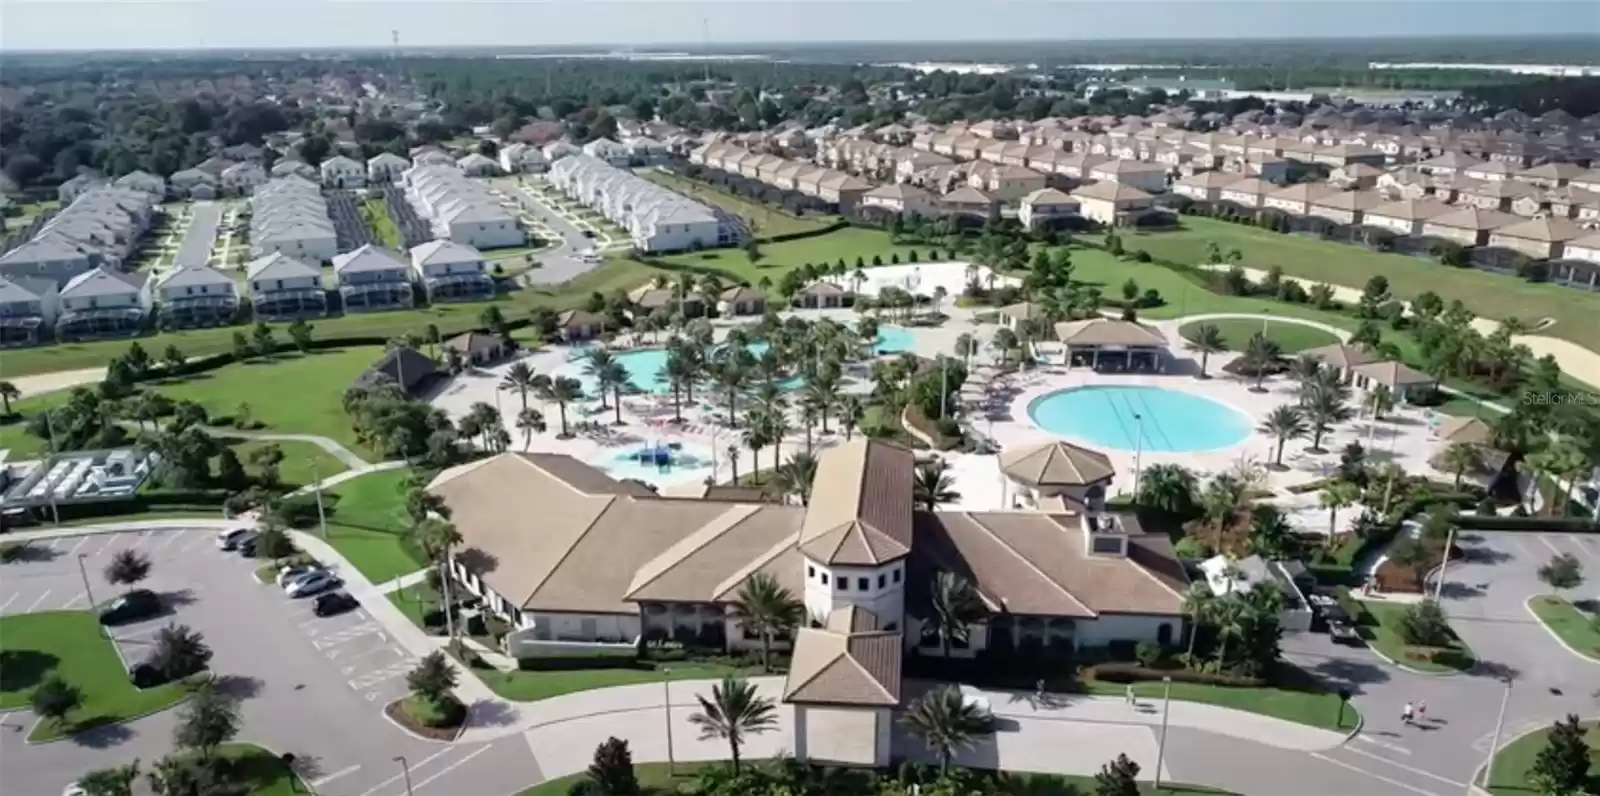 8993 CABOT CLIFFS DRIVE, DAVENPORT, Florida 33896, 4 Bedrooms Bedrooms, ,3 BathroomsBathrooms,Residential,For Sale,CABOT CLIFFS,MFRO6116116